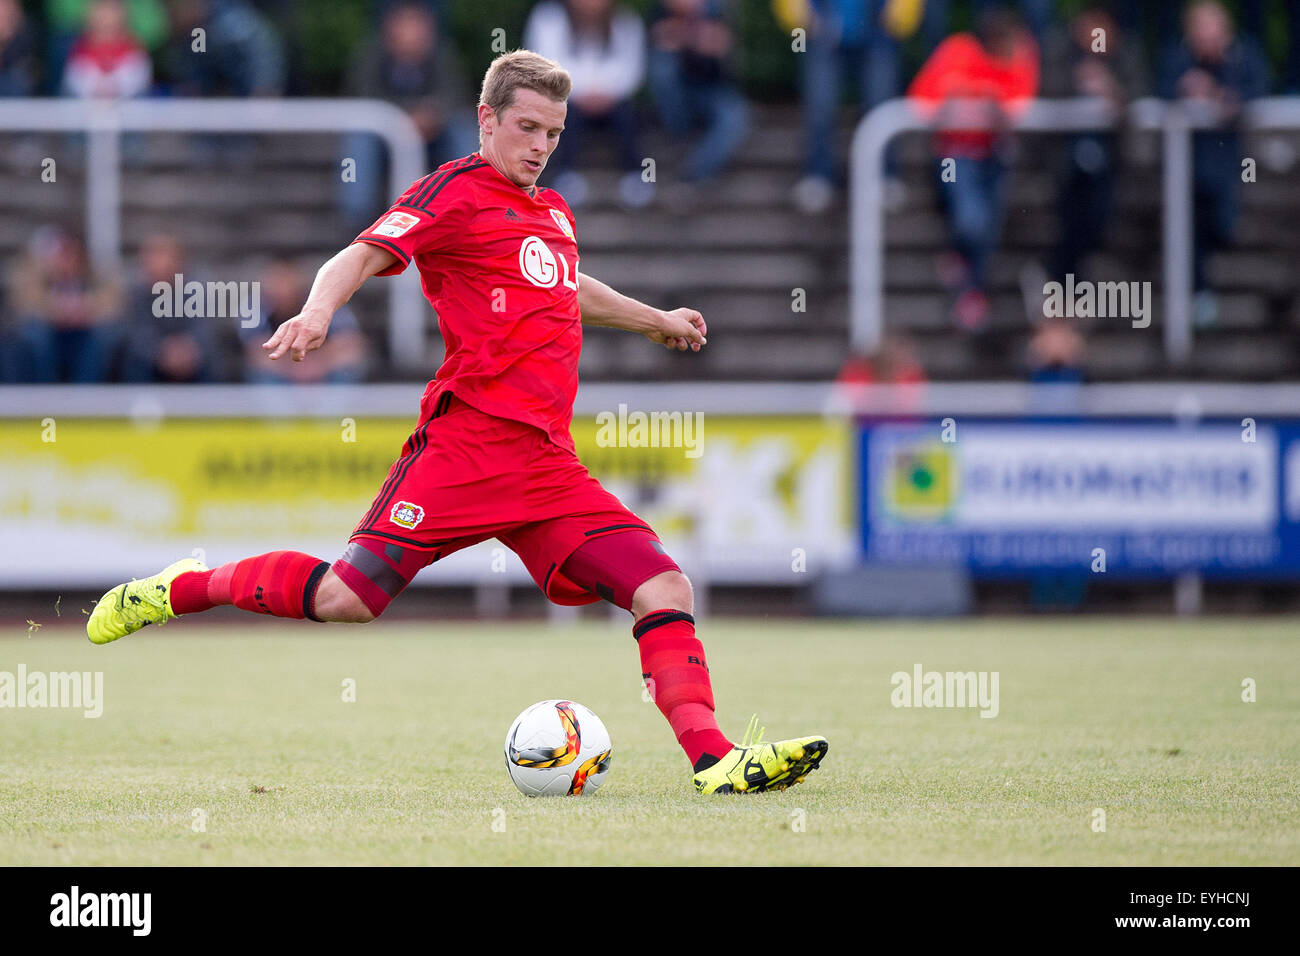 Leverkusen's Lars Bender in action during the soccer friendly match between Bayer 04 Leverkusen and UD Levante in Bergisch Gladbach, Germany, 29 July 2015. Photo: MARIUS BECKER/dpa Stock Photo